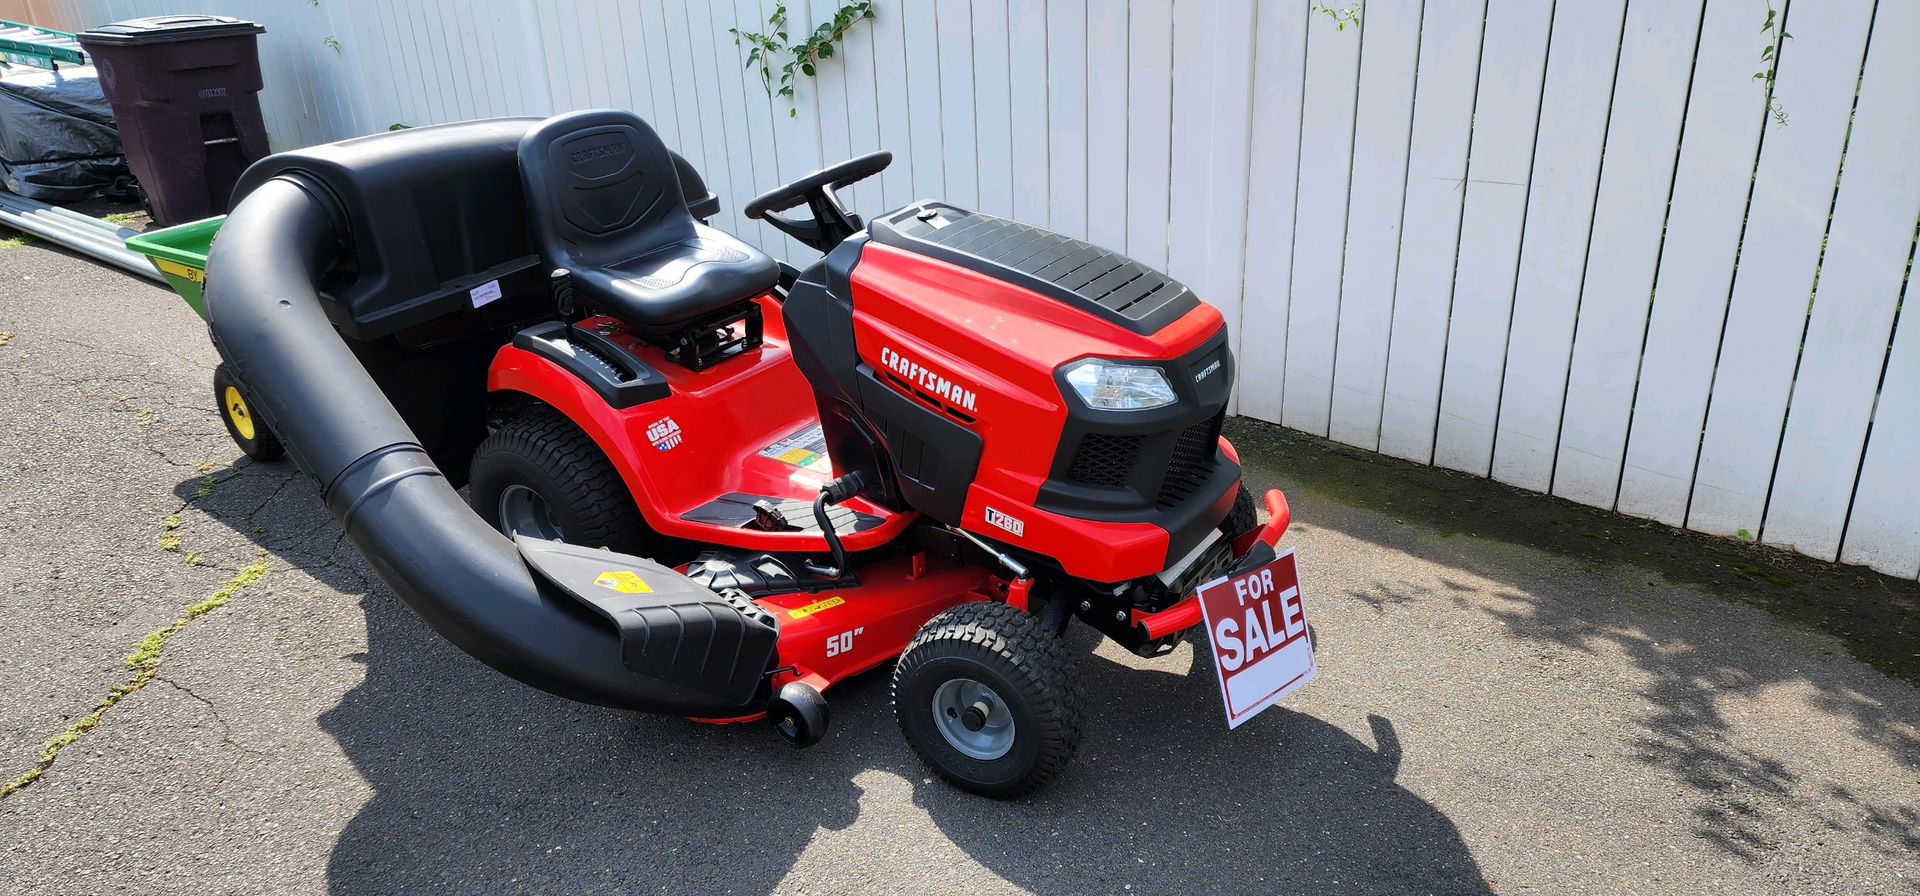 CRAFTSMAN T260 Turn Tight 50-in 23-HP V-twin Riding Lawn Mower